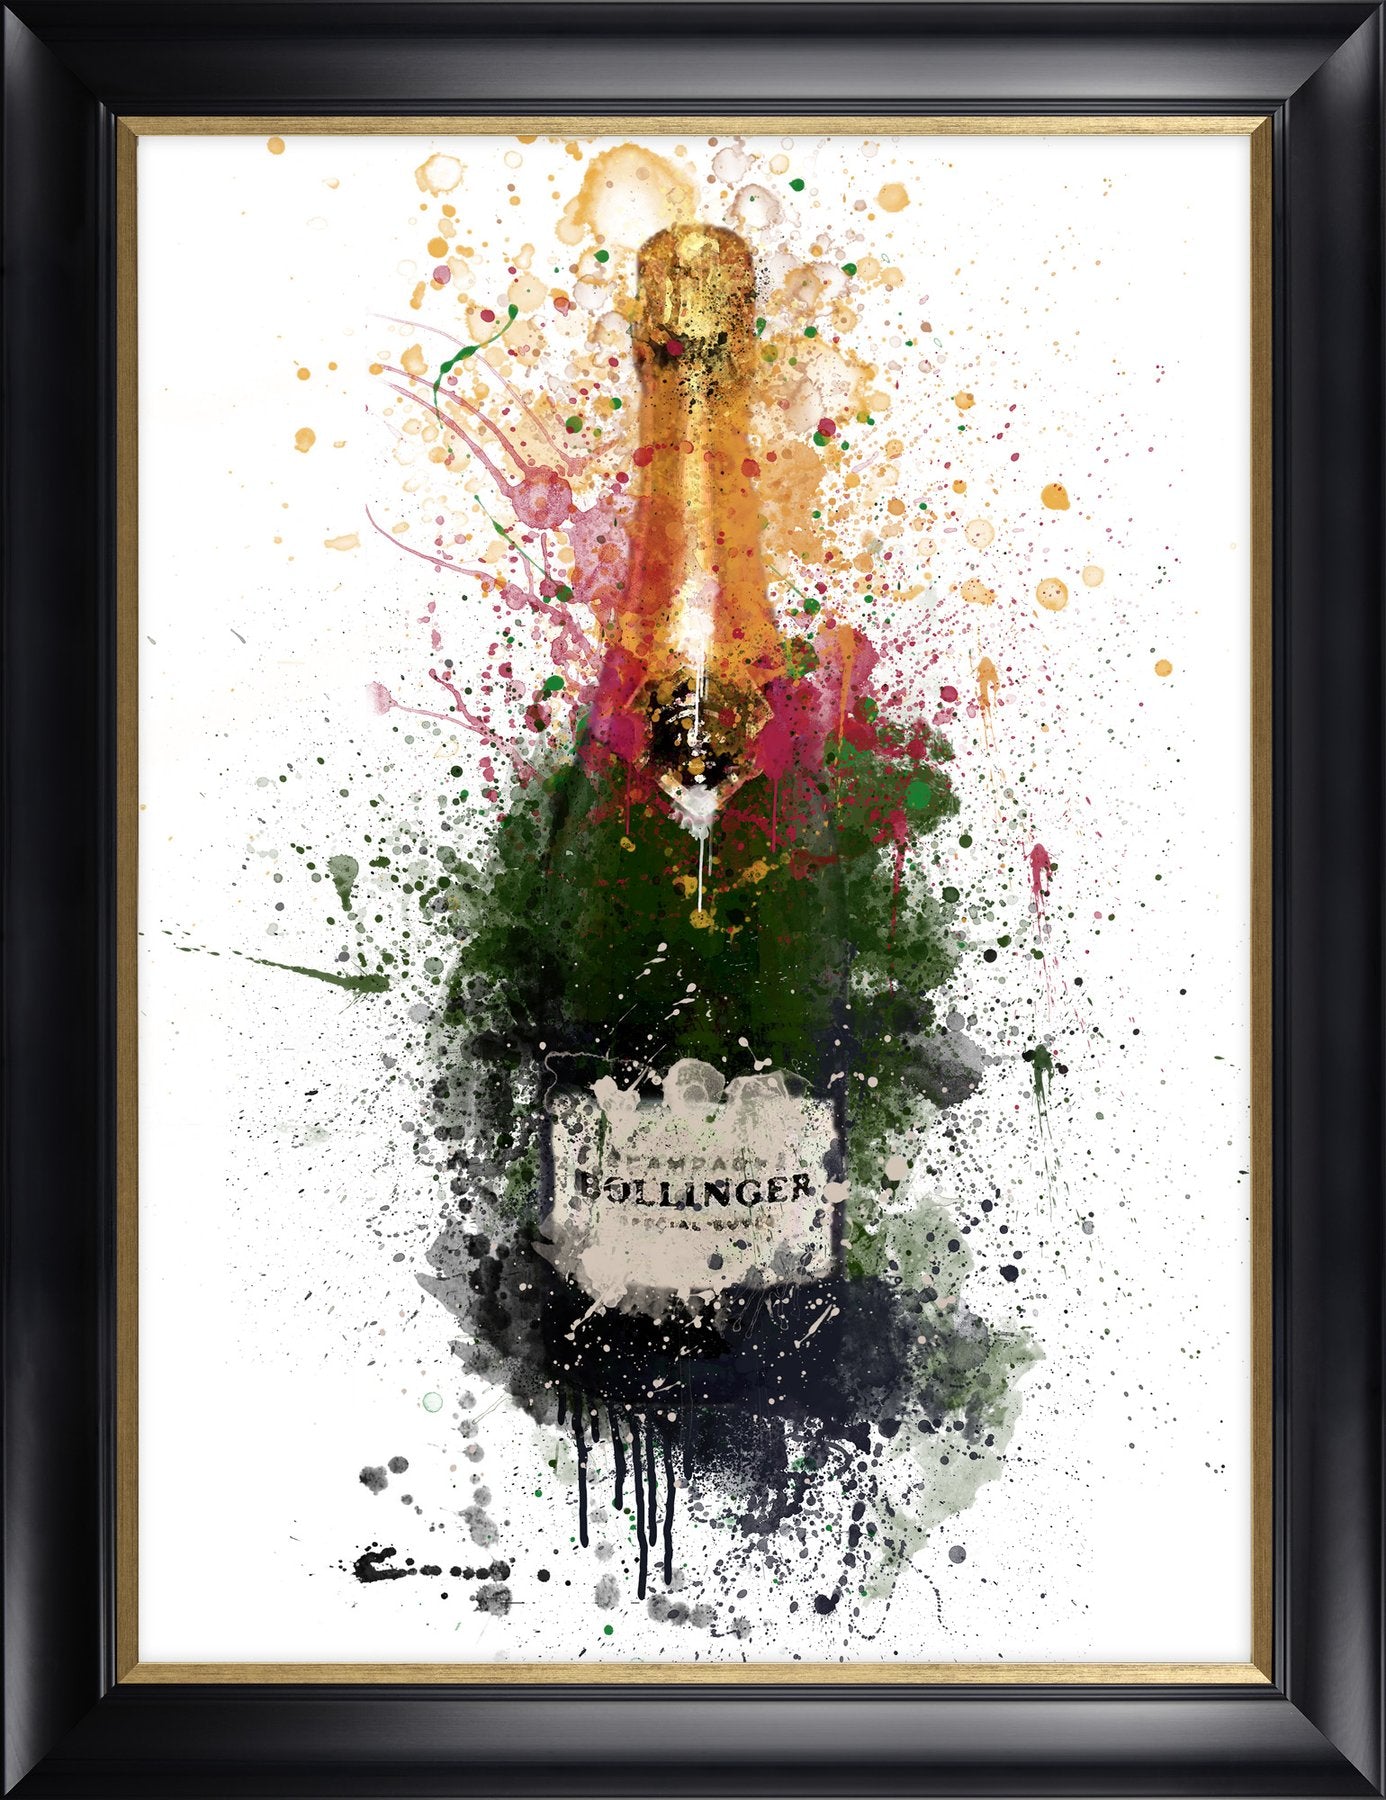 Bollinger framed print by Pop & Toast from Artworx Gallery